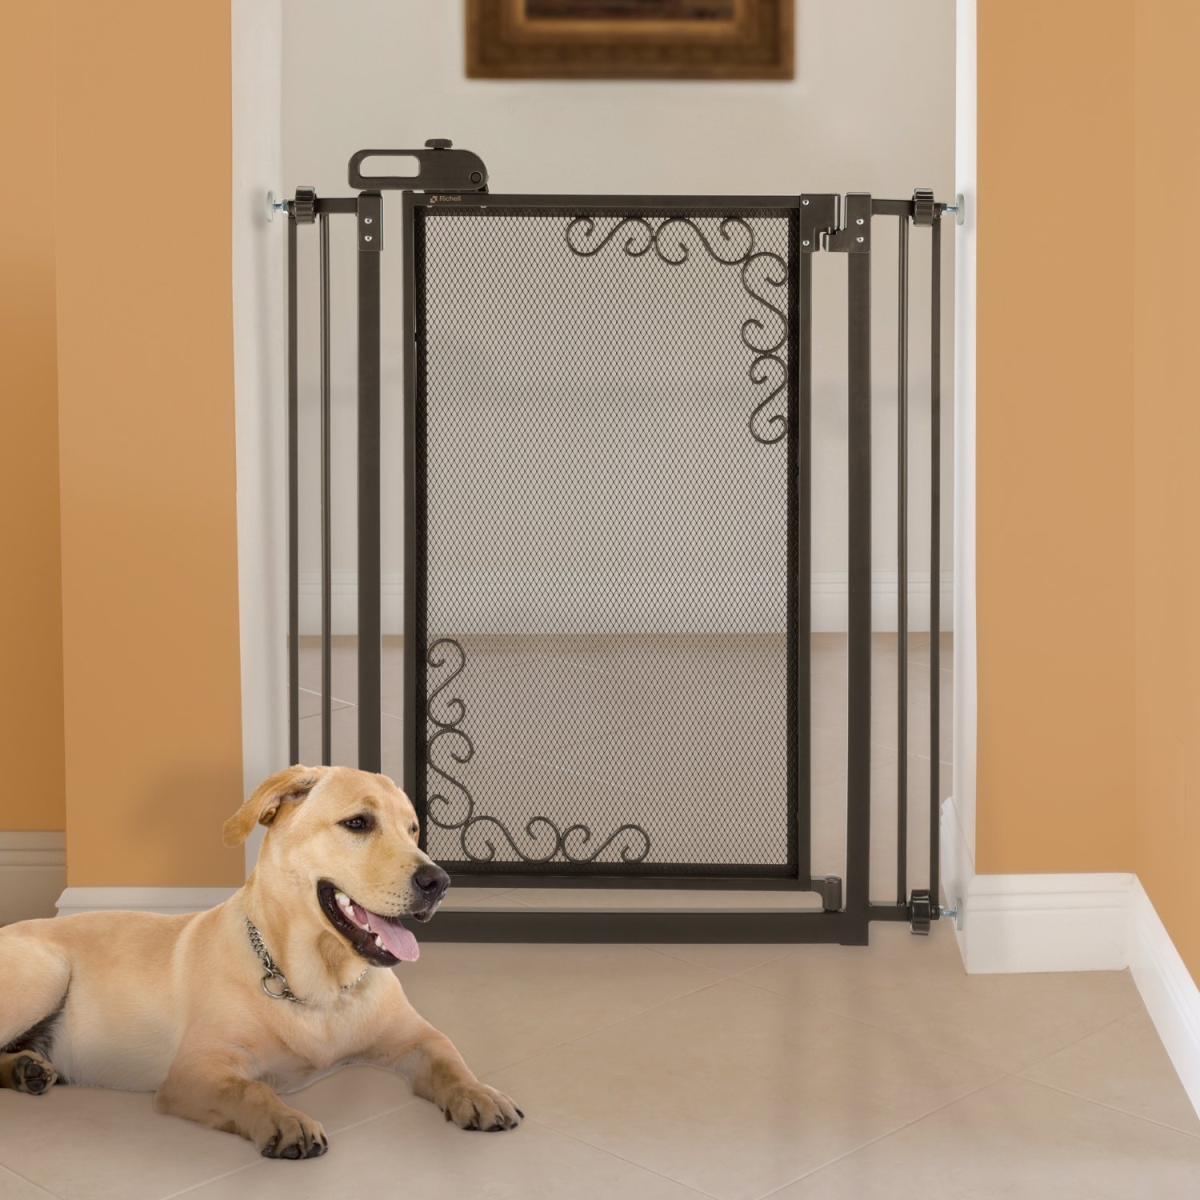 Picture of Richell 94942 32.5-36.5 x 2.4 x 40 in. One-Touch Metal Mesh Pet Gate - Black - Tall